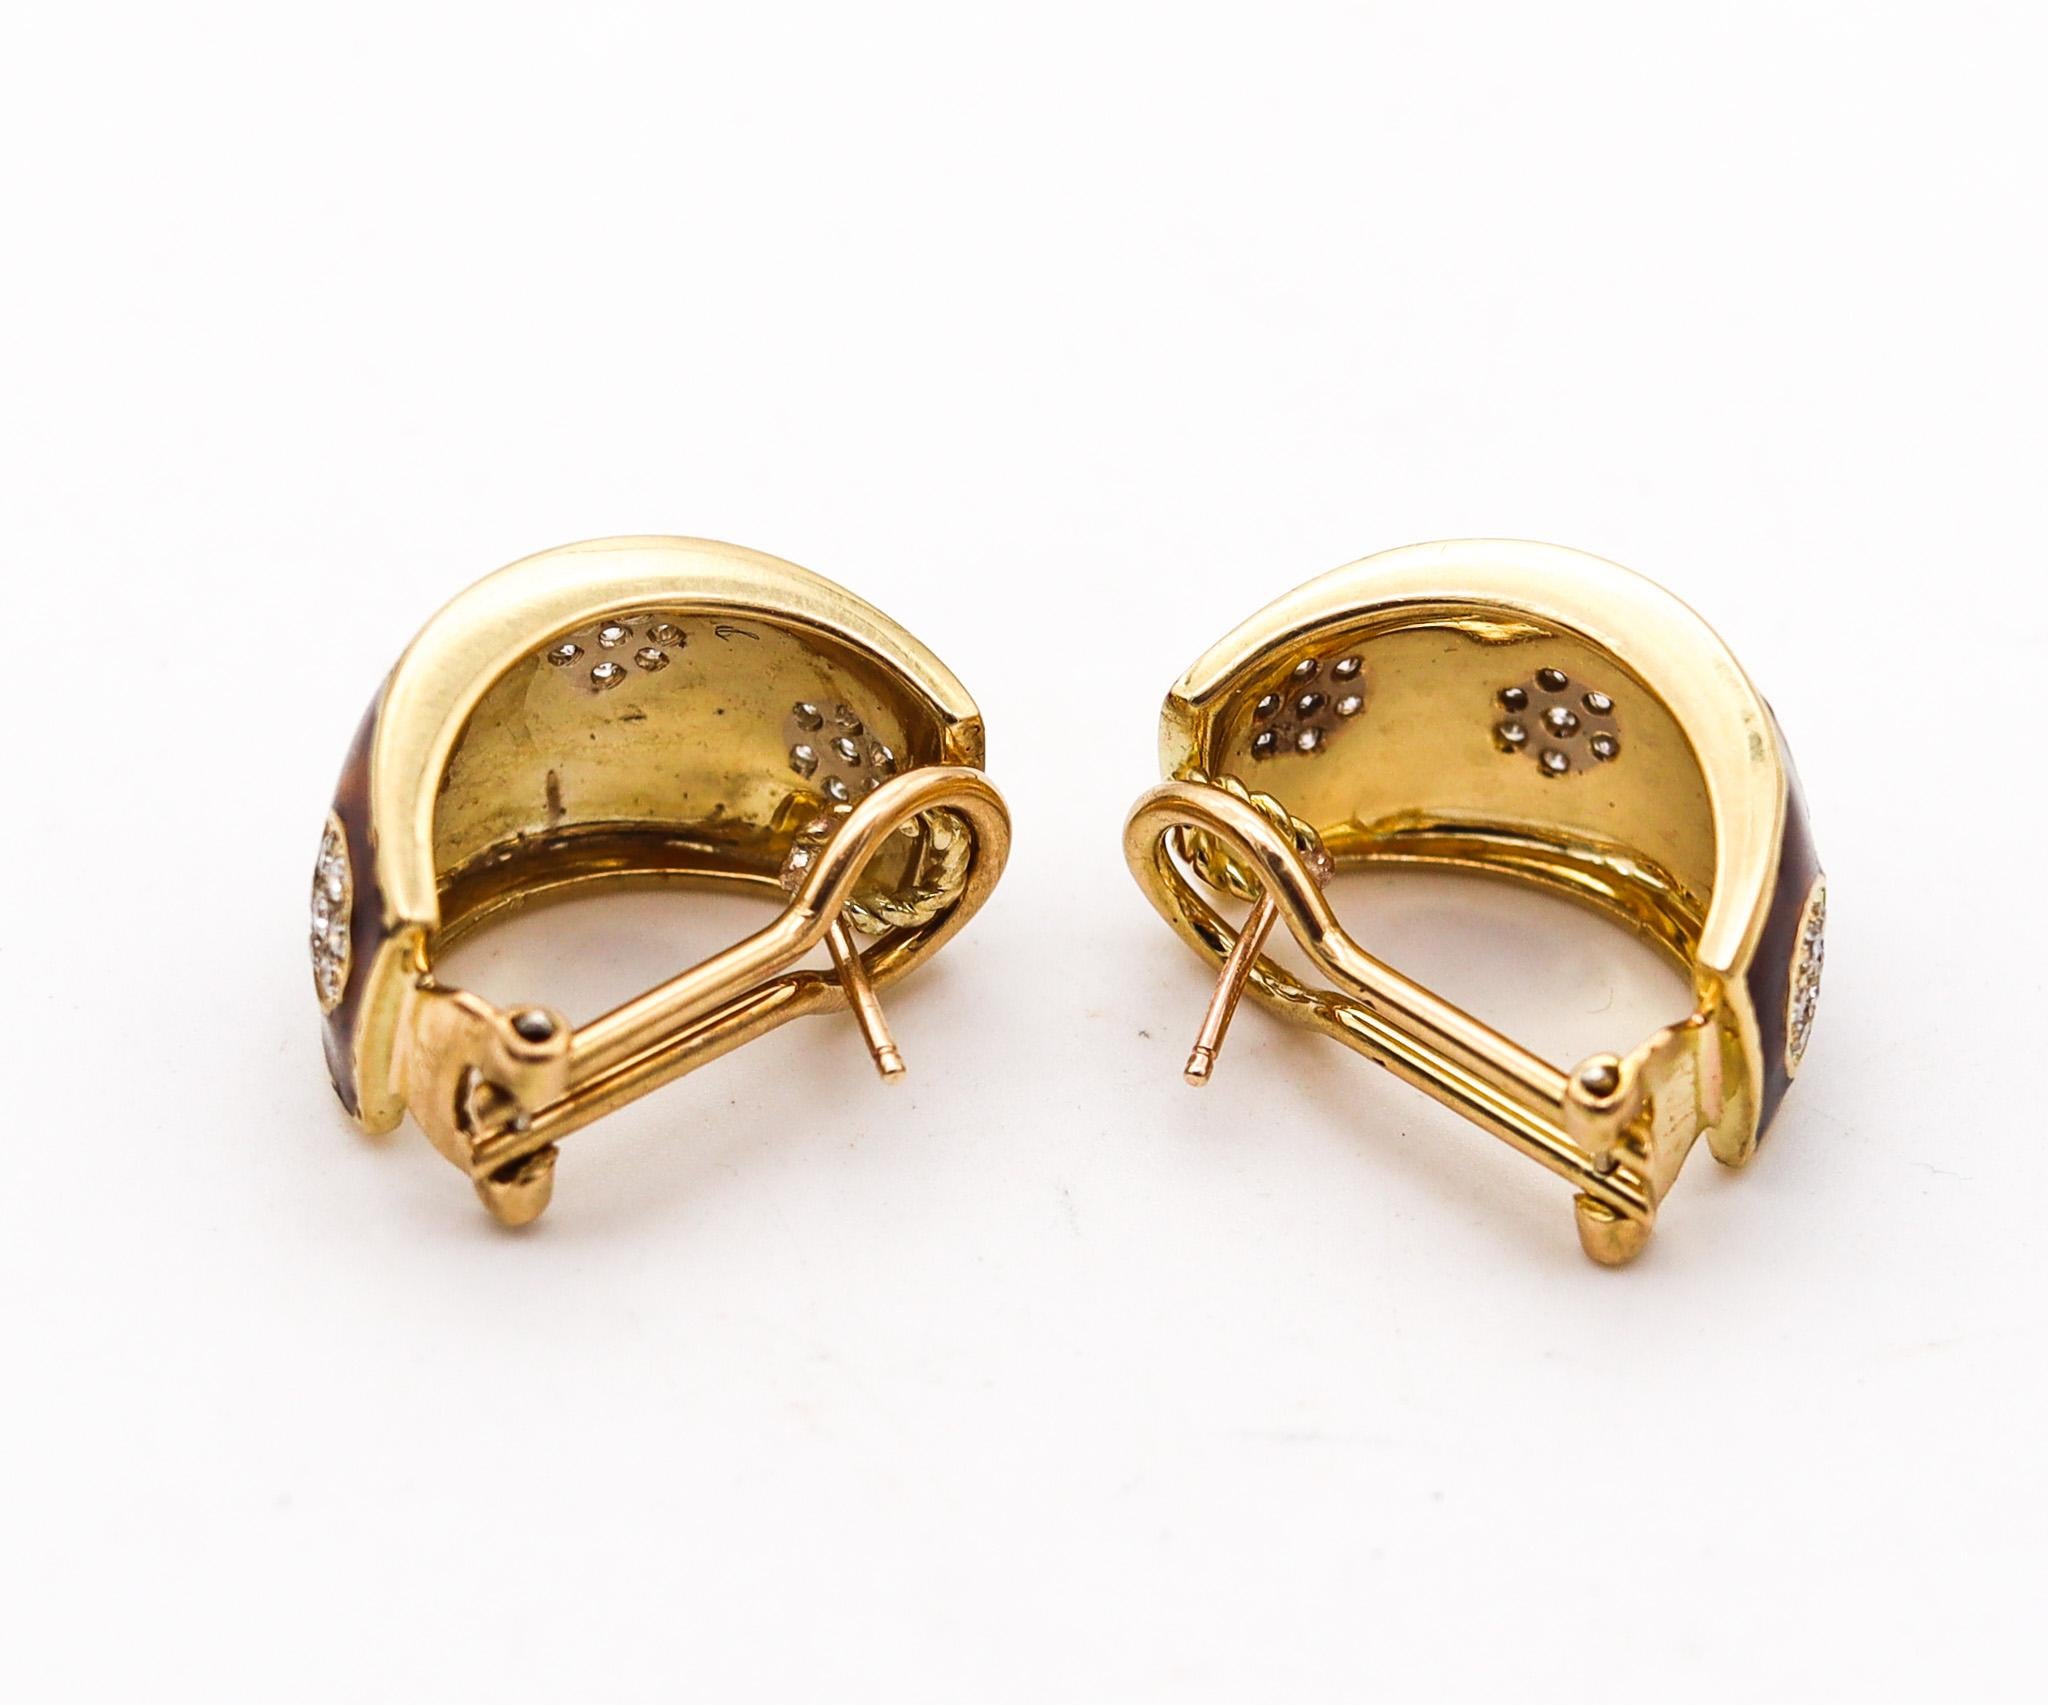 Brilliant Cut Van Cleef & Arpels 1970 Enameled Earrings In 18Kt Gold With 1.68 Ctw in Diamonds For Sale